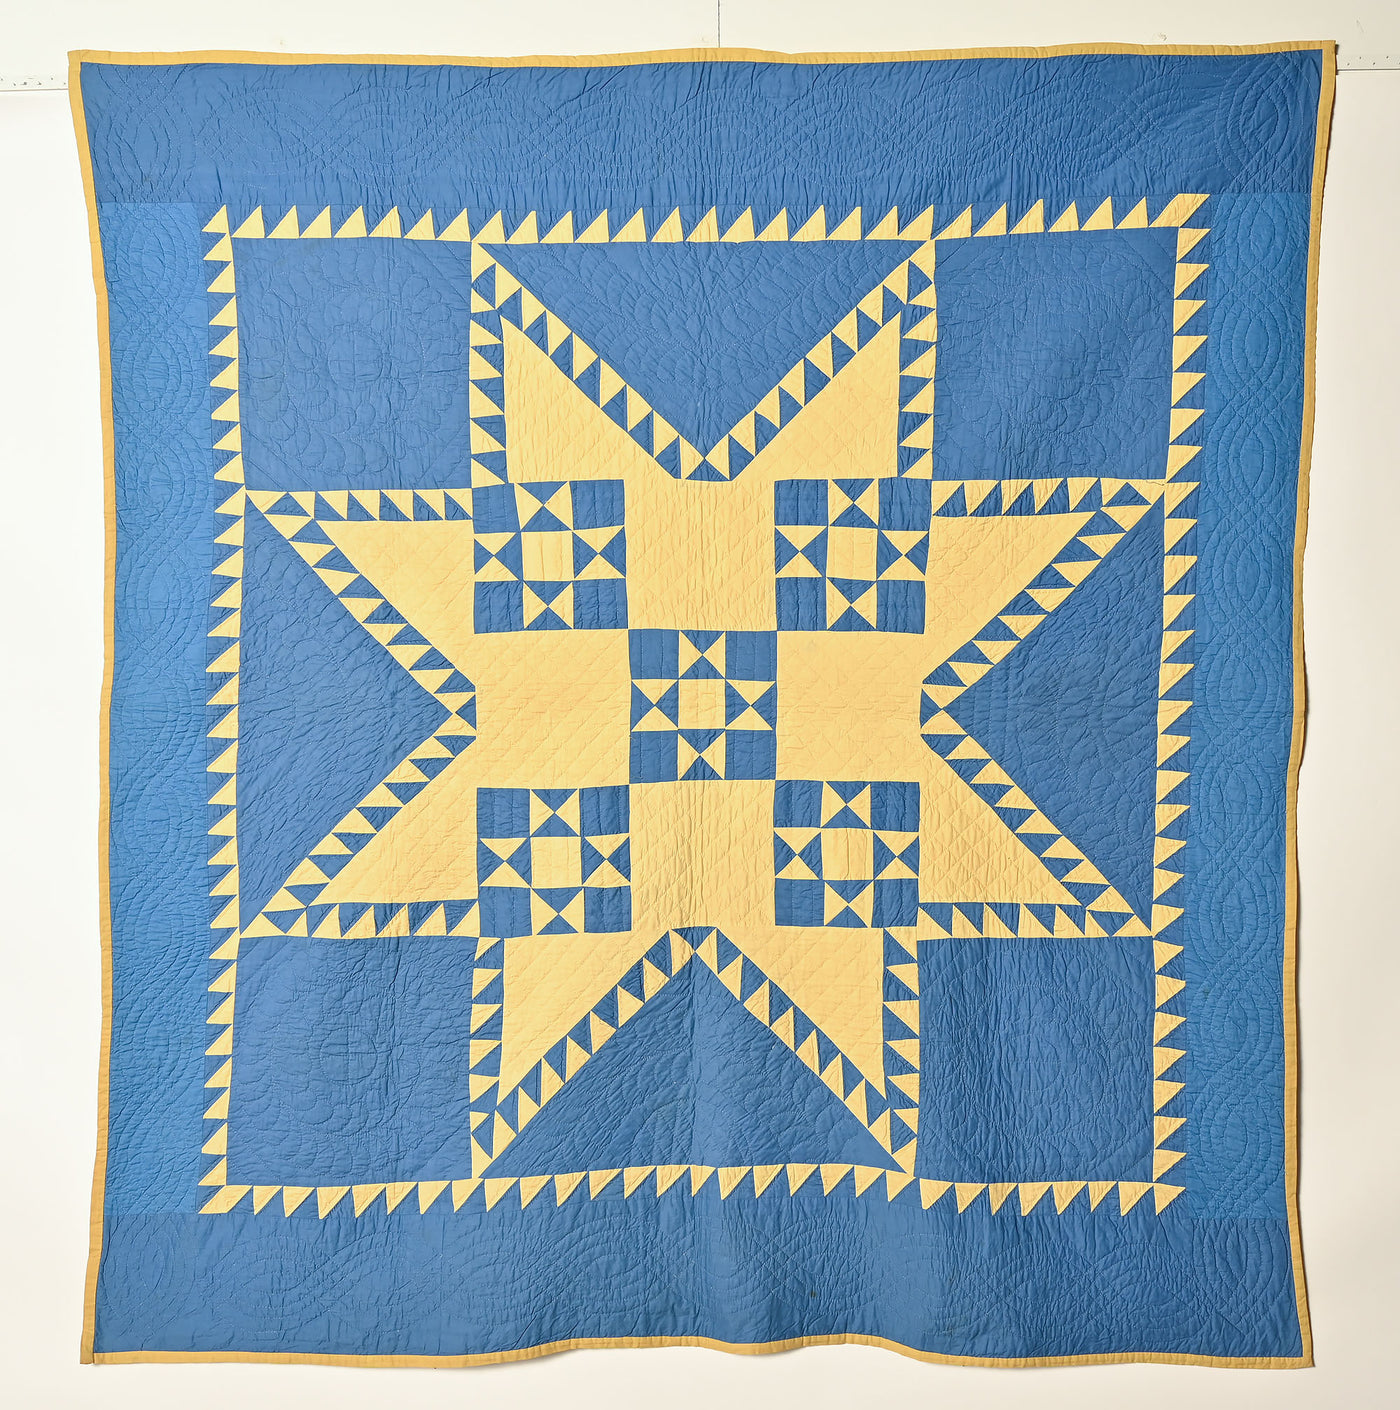 Amish Stars within Feathered Star Quilt